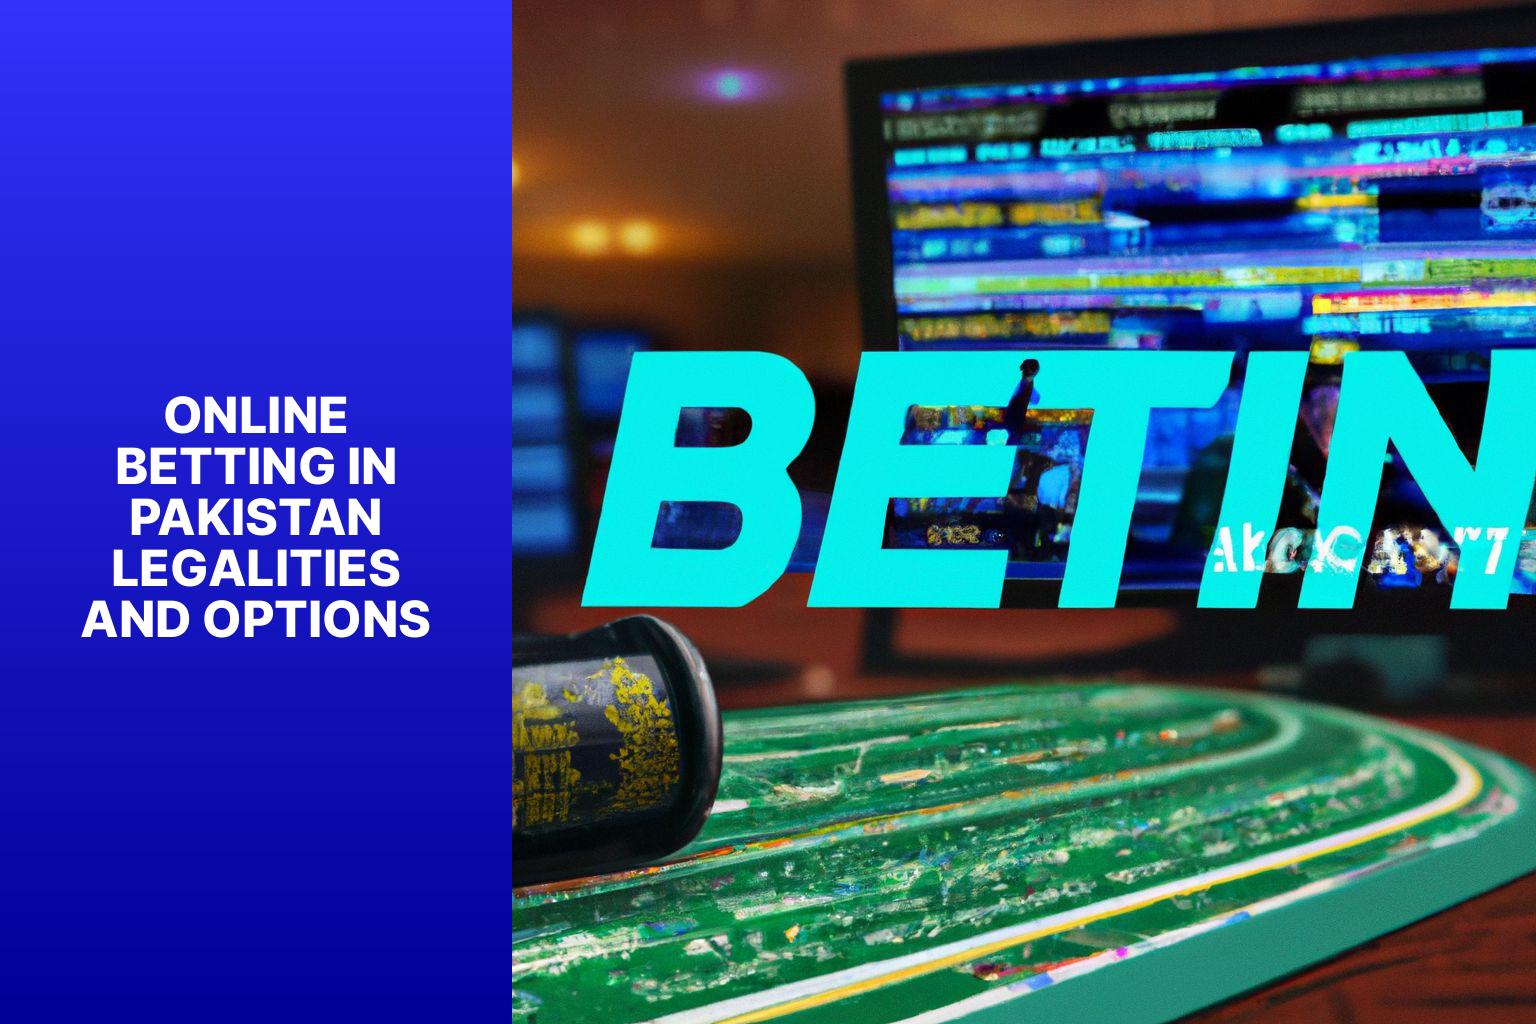 Online Betting in Pakistan Legalities and Options